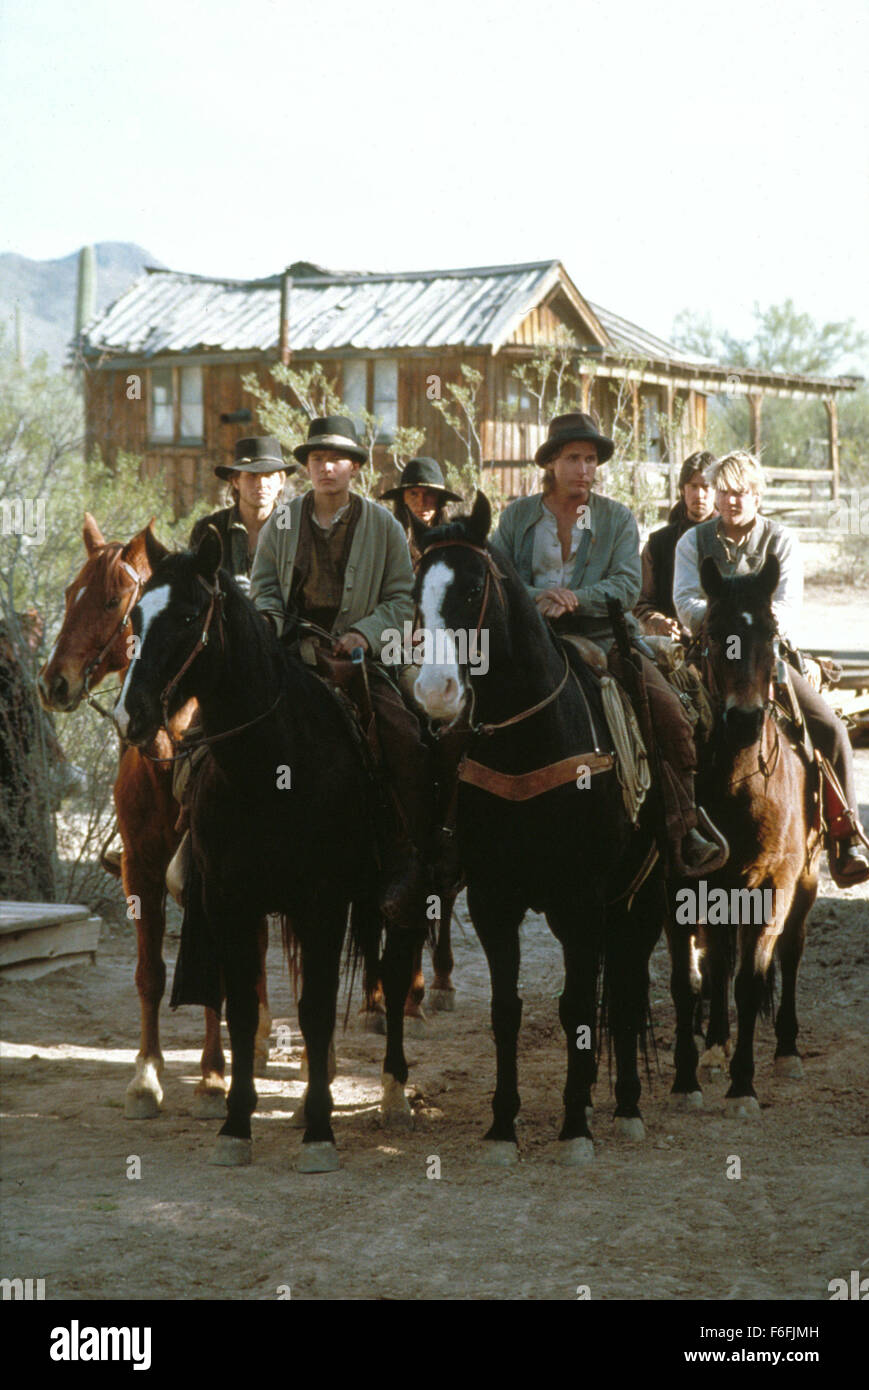 RELEASE DATE: August 01, 1990   MOVIE TITLE: Young Guns II   STUDIO: Twentieth Century Fox   DIRECTOR: Geoff Murphy   PLOT: Billy 'The Kid' and his gang is wanted by the law, and when 'Doc' Scurlock and Chavez are captured, Billy has to save them. They escape and set south for Mexico. 'Let's hire a thief to catch one', John S. Chisum said, so he paid Pat Garrett, one of Billy's former partners, $1000 for the killing of William H. Bonney aka Billy 'The Kid'.   PICTURED: EMILIO ESTEVEZ as William H. 'Billy the Kid' Bonney, with his gang.   (Credit Image: c Twentieth Century Fox/Entertainment Pic Stock Photo